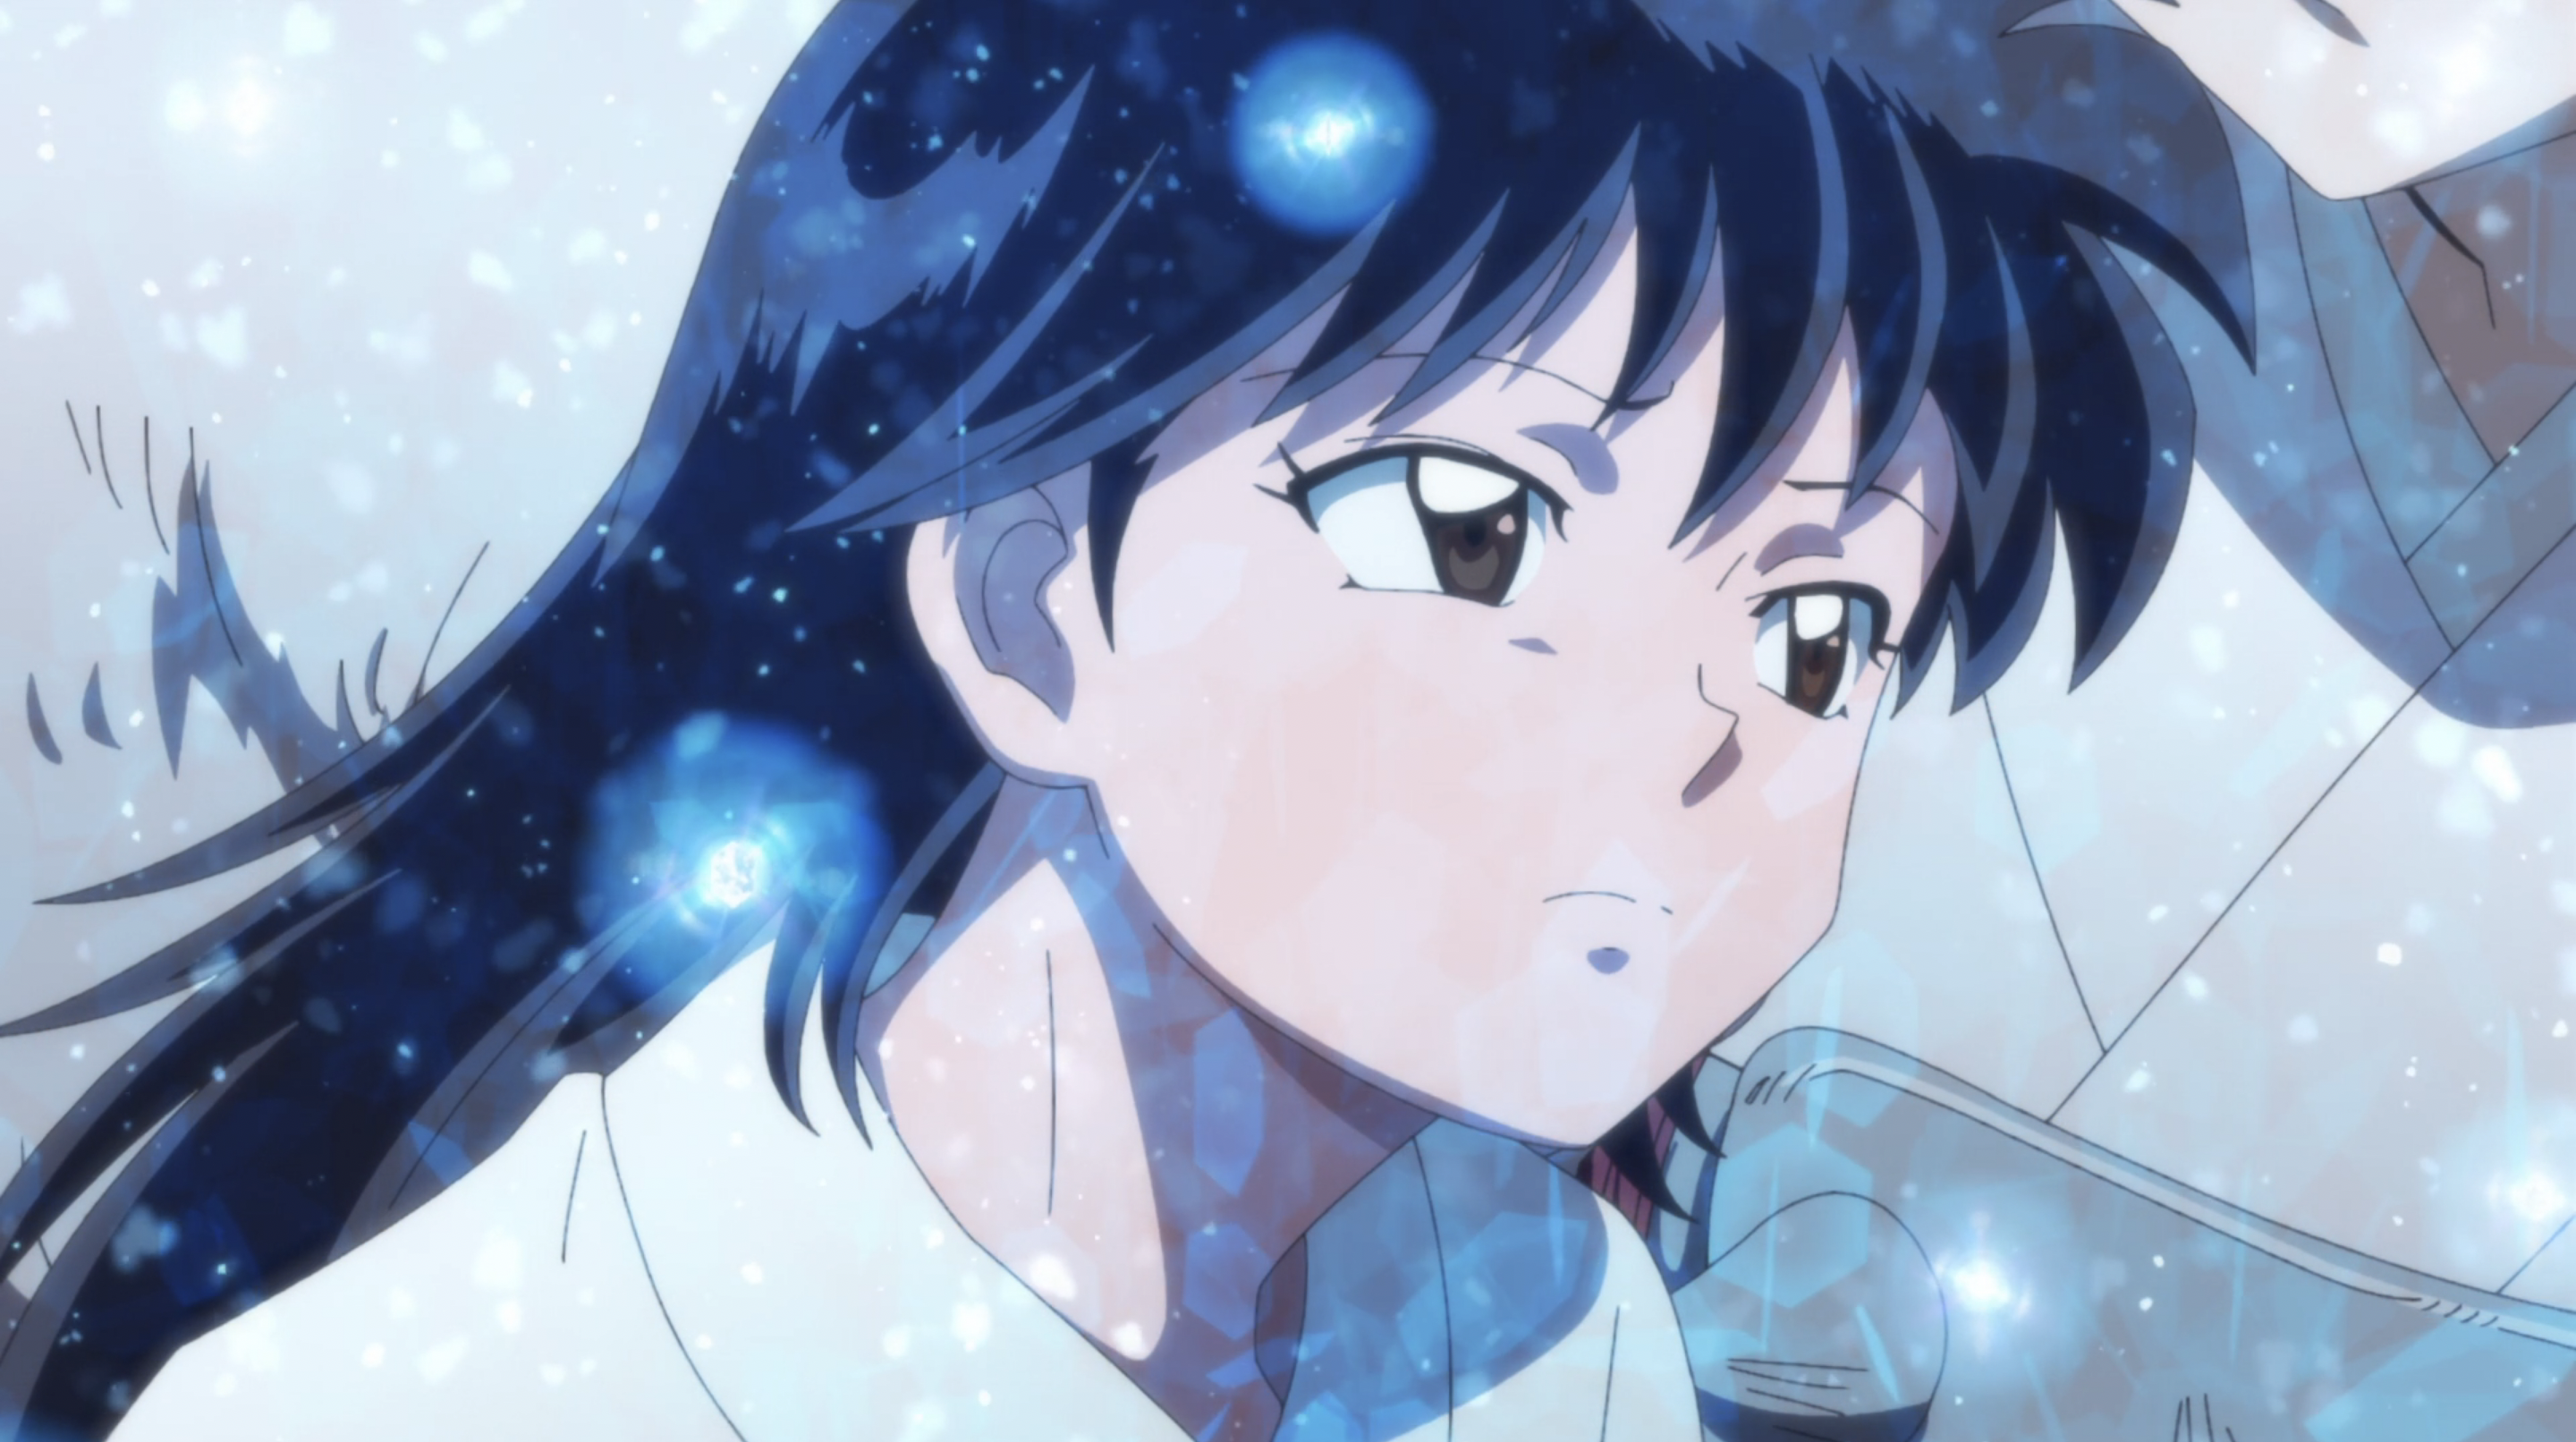 When Rin woke up, she looked like drown in some kind of water